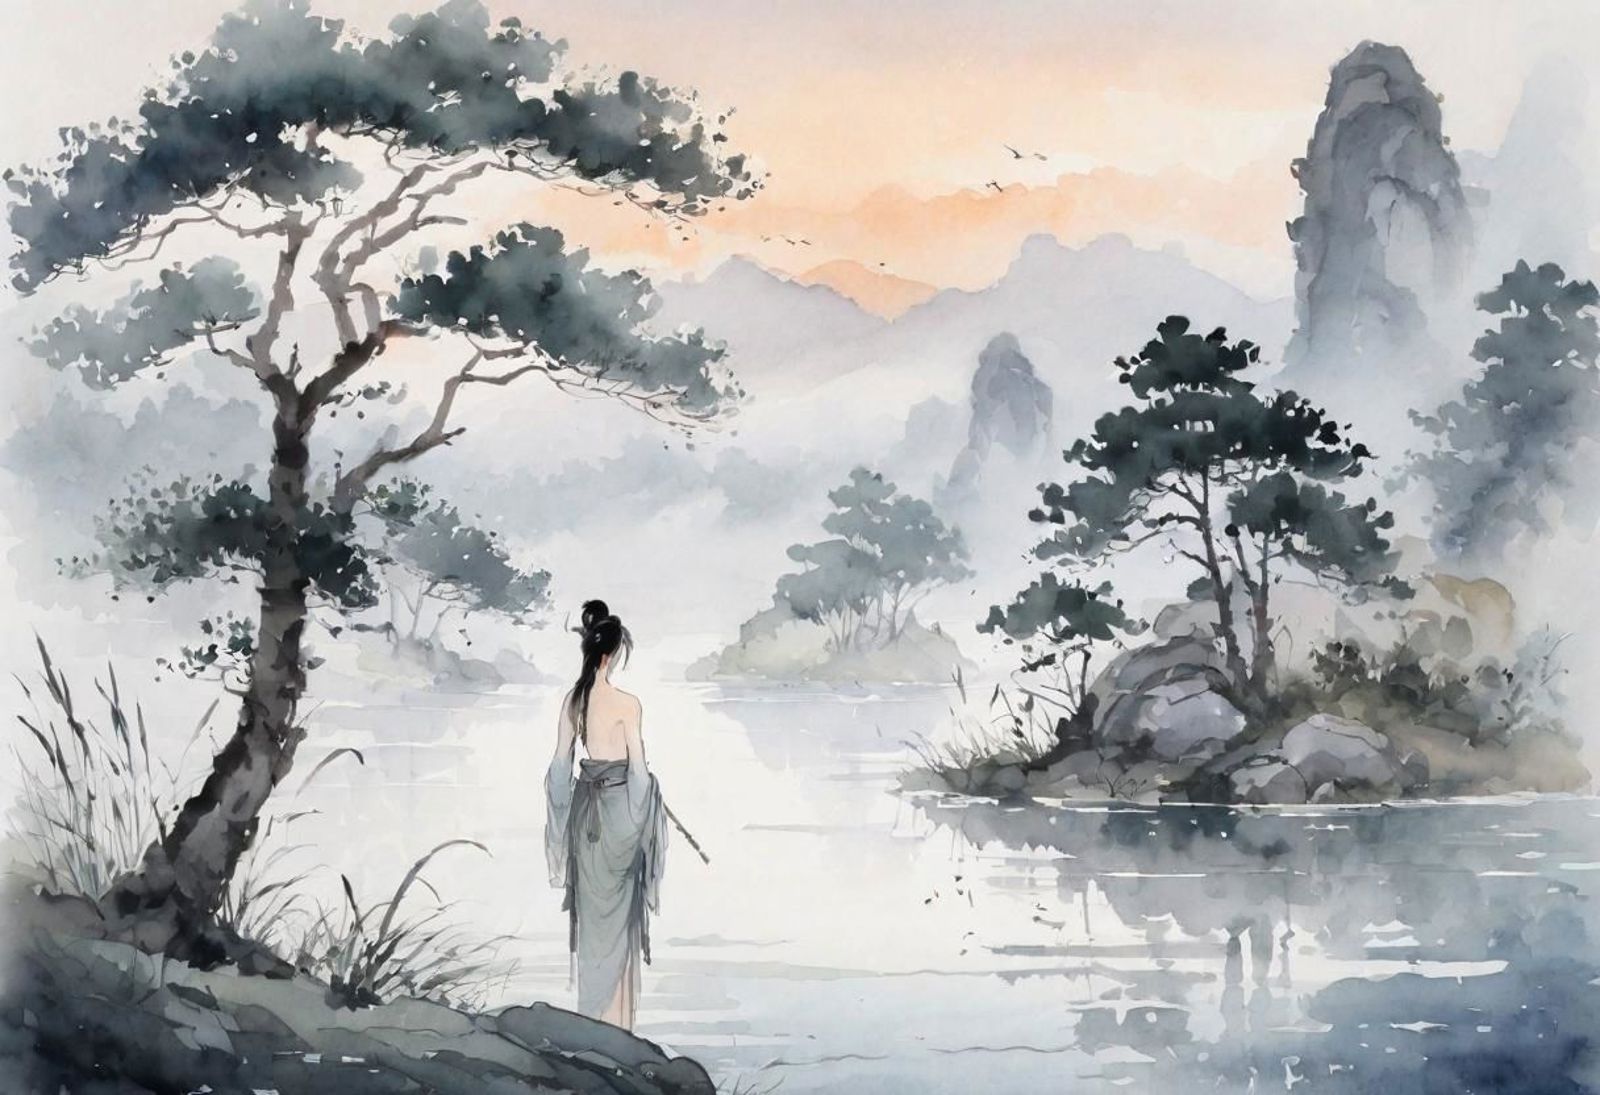 A painting of a woman in a white dress standing near a body of water.